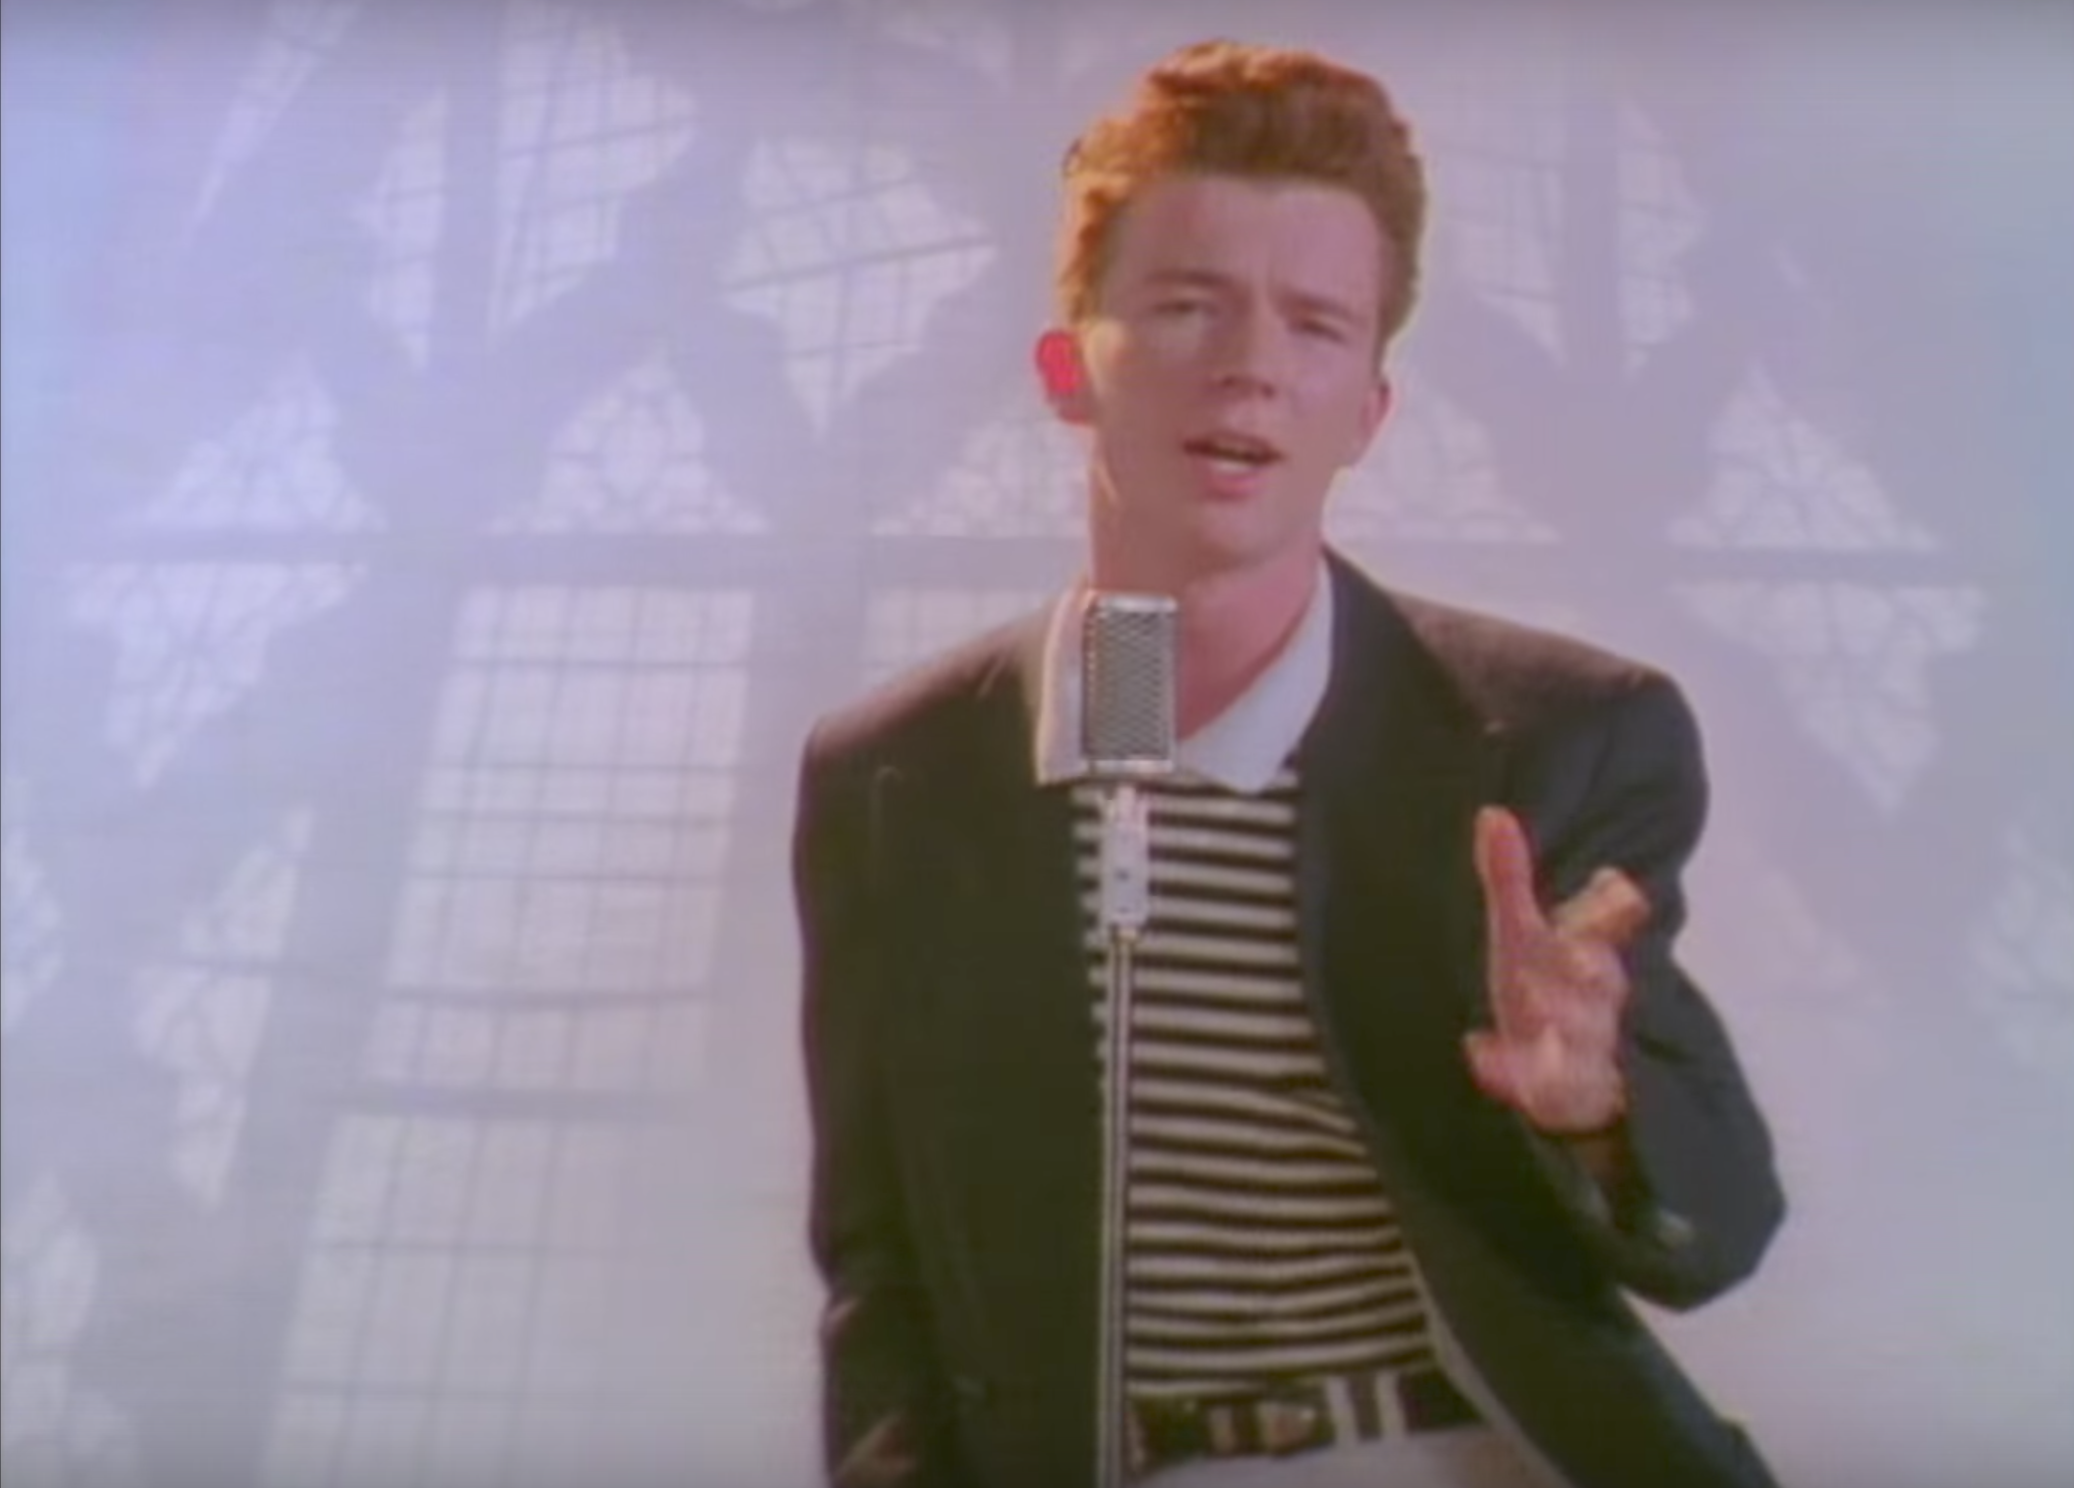 The origins of the 'Rick Roll': Rick Astley on his role as an internet meme